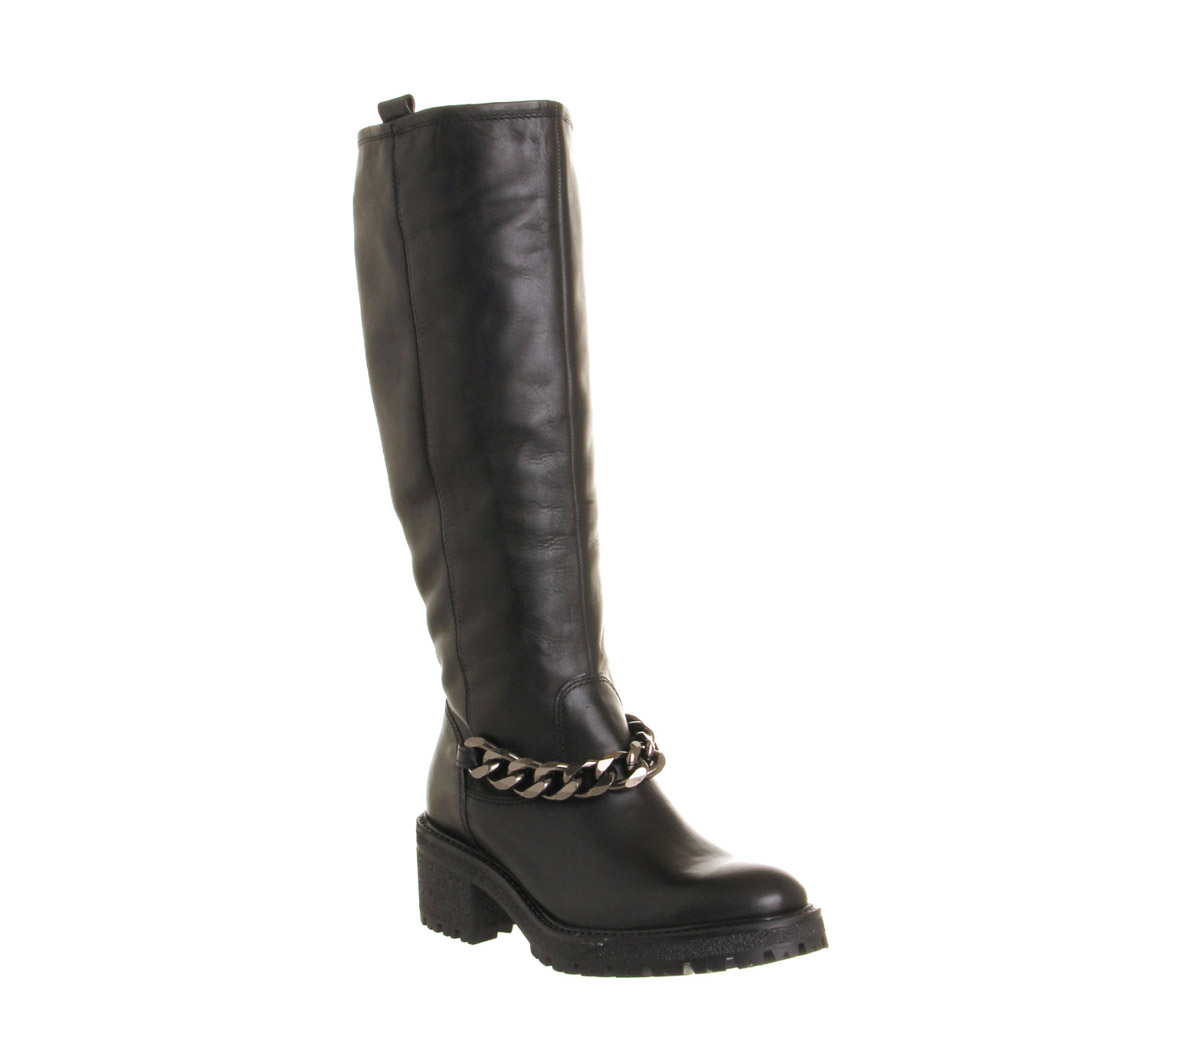 OFFICENightly Heavy Chain Knee bootsBlack Leather